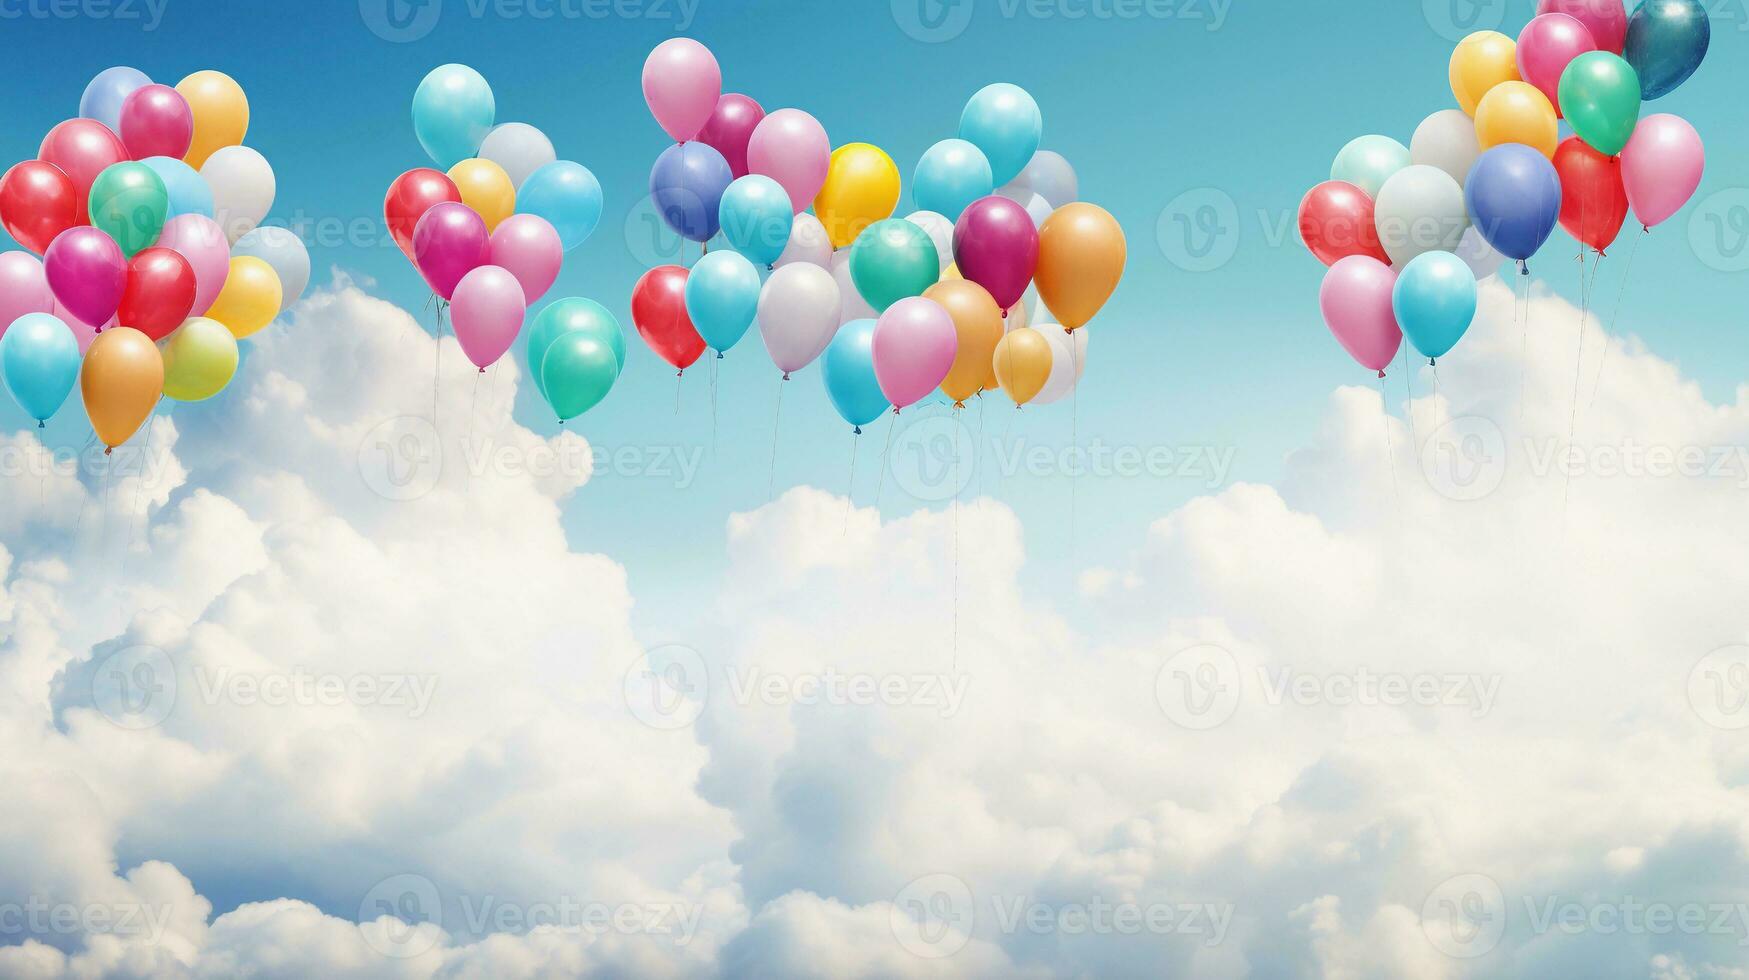 A joyful scene of colorful balloons ascending into a textured sky filled with fluffy clouds. The balloons are whimsically arranged against the backdrop. AI generated photo